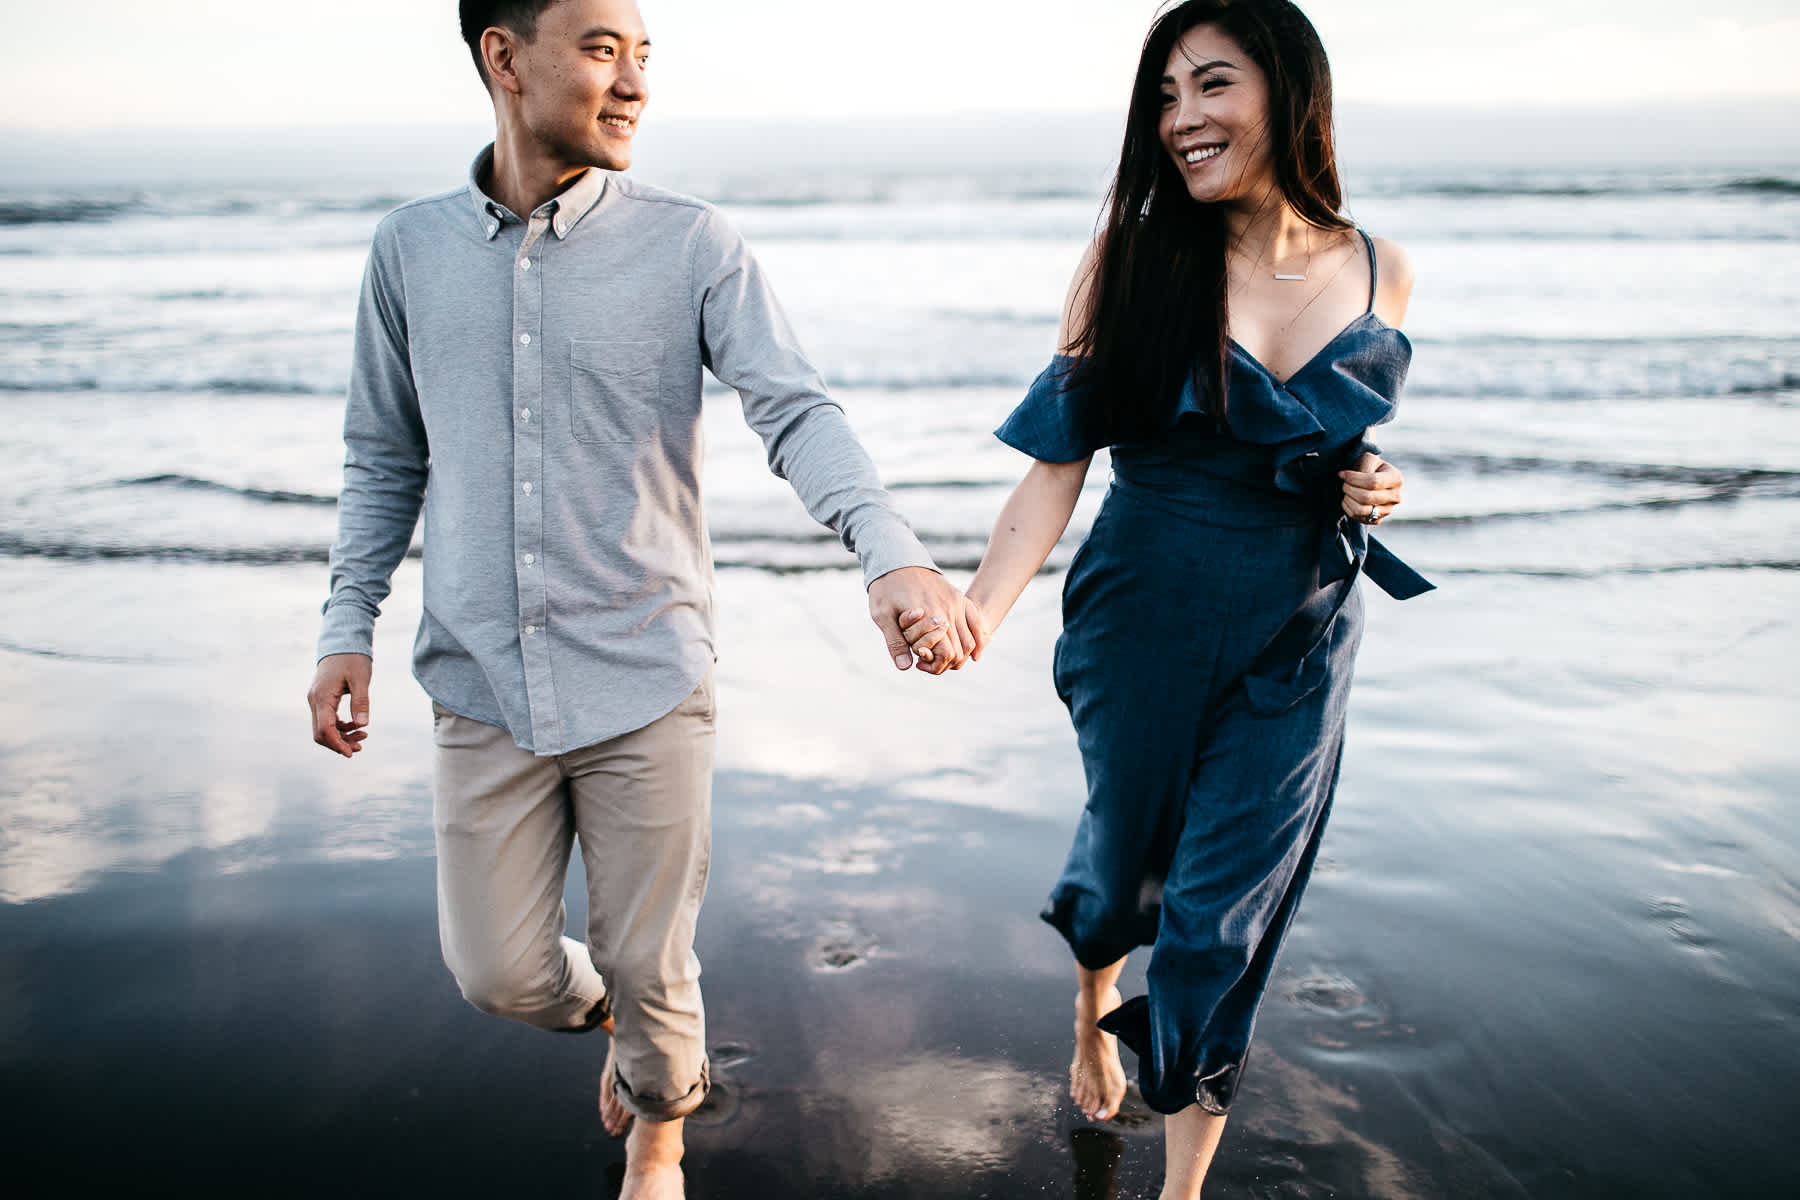 stinson-beach-muir-woods-sf-fun-quirky-engagement-session-21